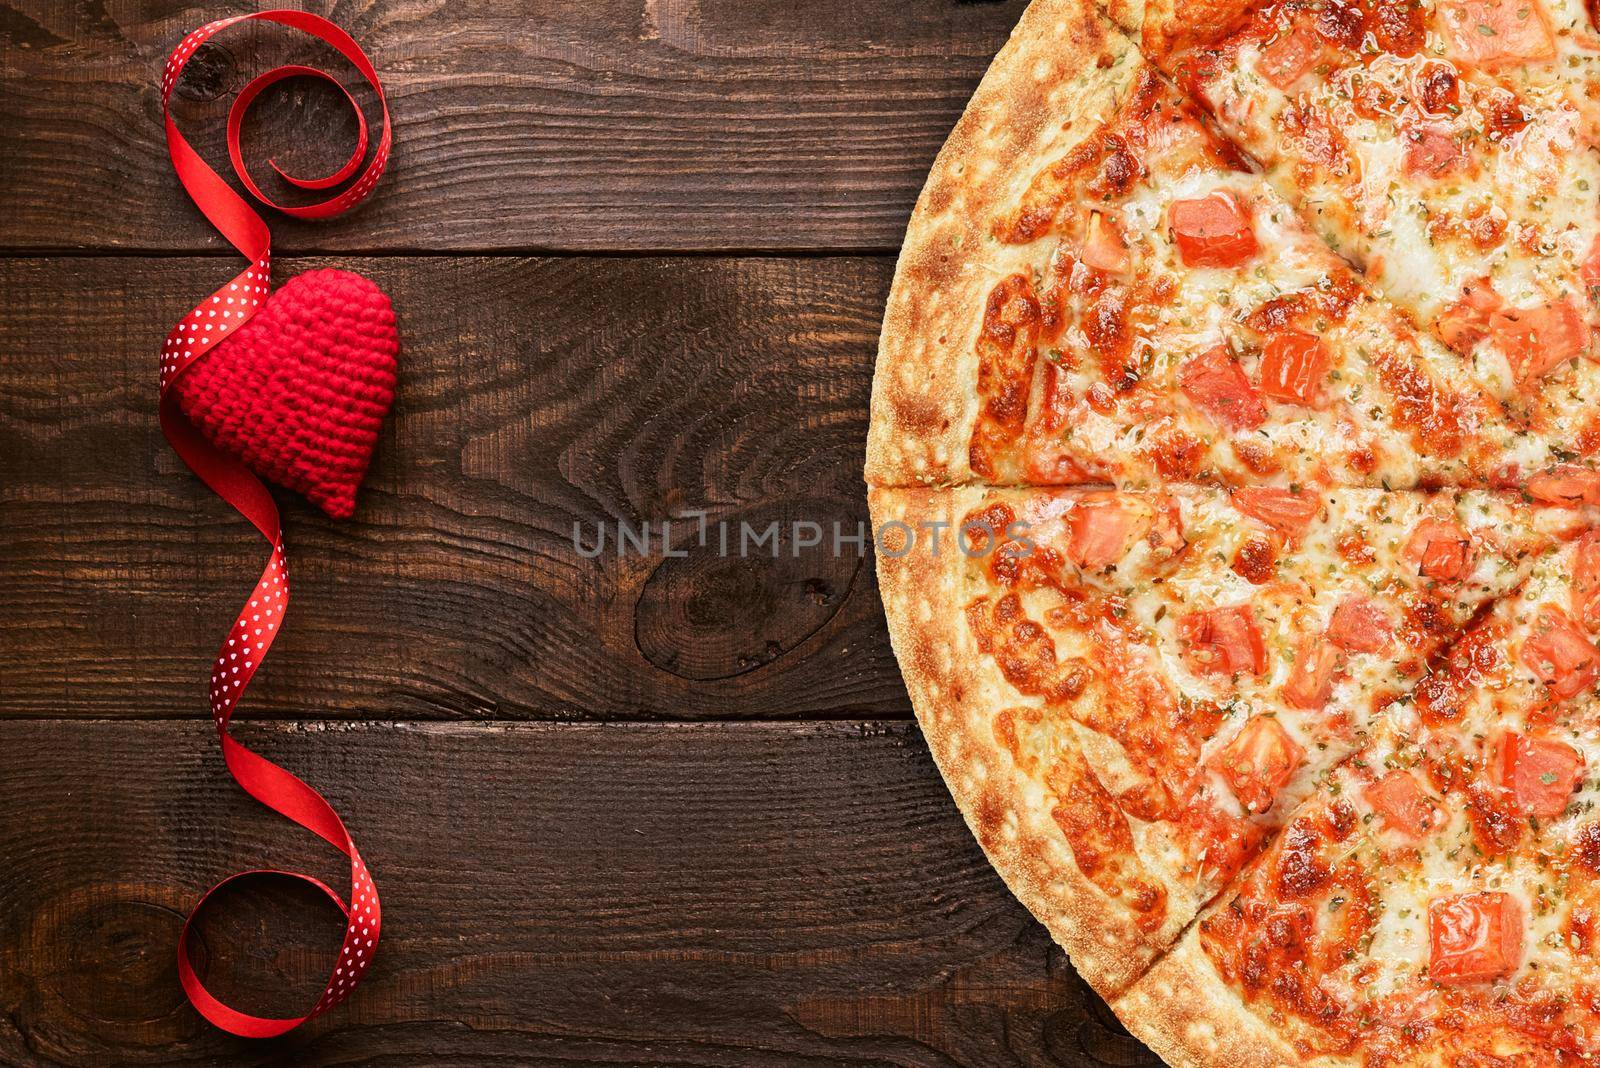 the concept of an advertising banner for Valentine's Day pizza as a gift with space for text